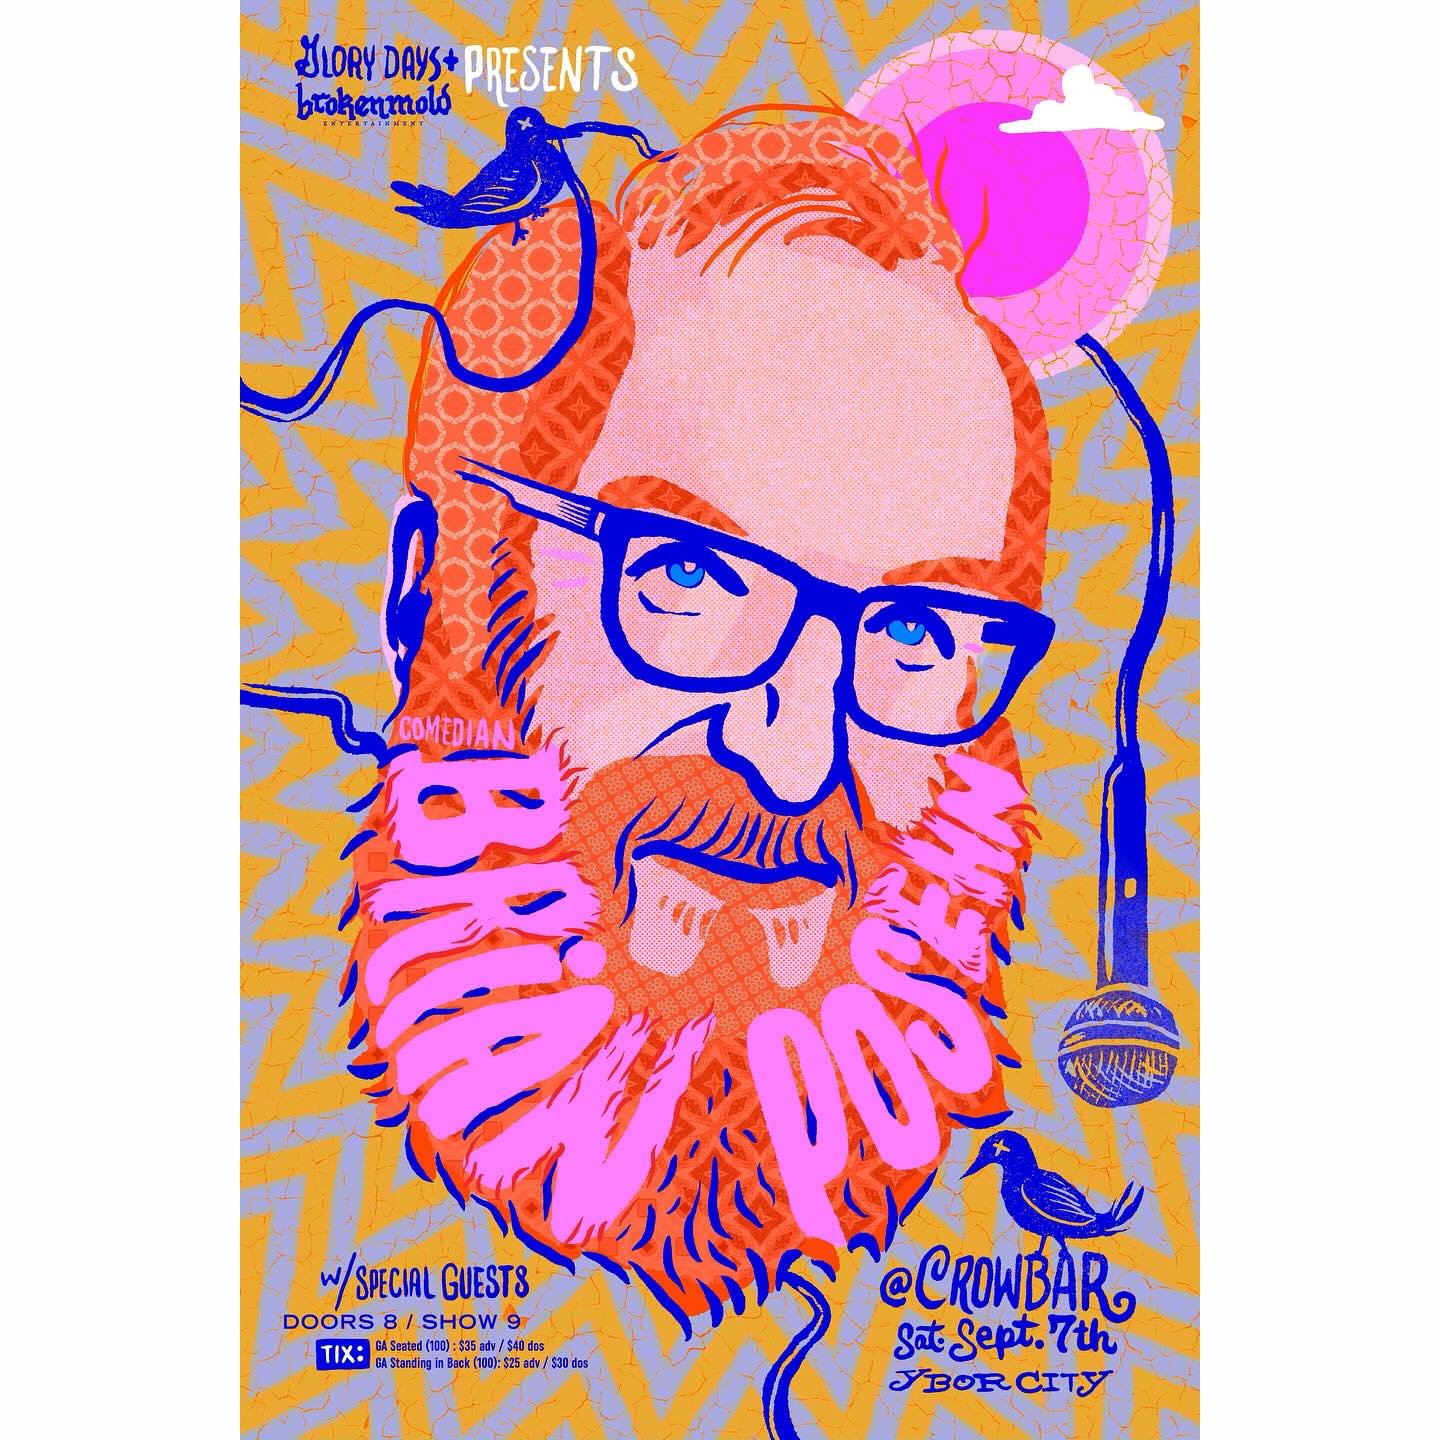 🎨 Exciting Announcement! 🎨

Thrilled to share my latest artwork for the Brian Posehn stand-up comedy show at Crowbar in Ybor City, happening on Saturday, September 7th! Presented by Glory Days and Brokenmold Entertainment, this promises to be an un